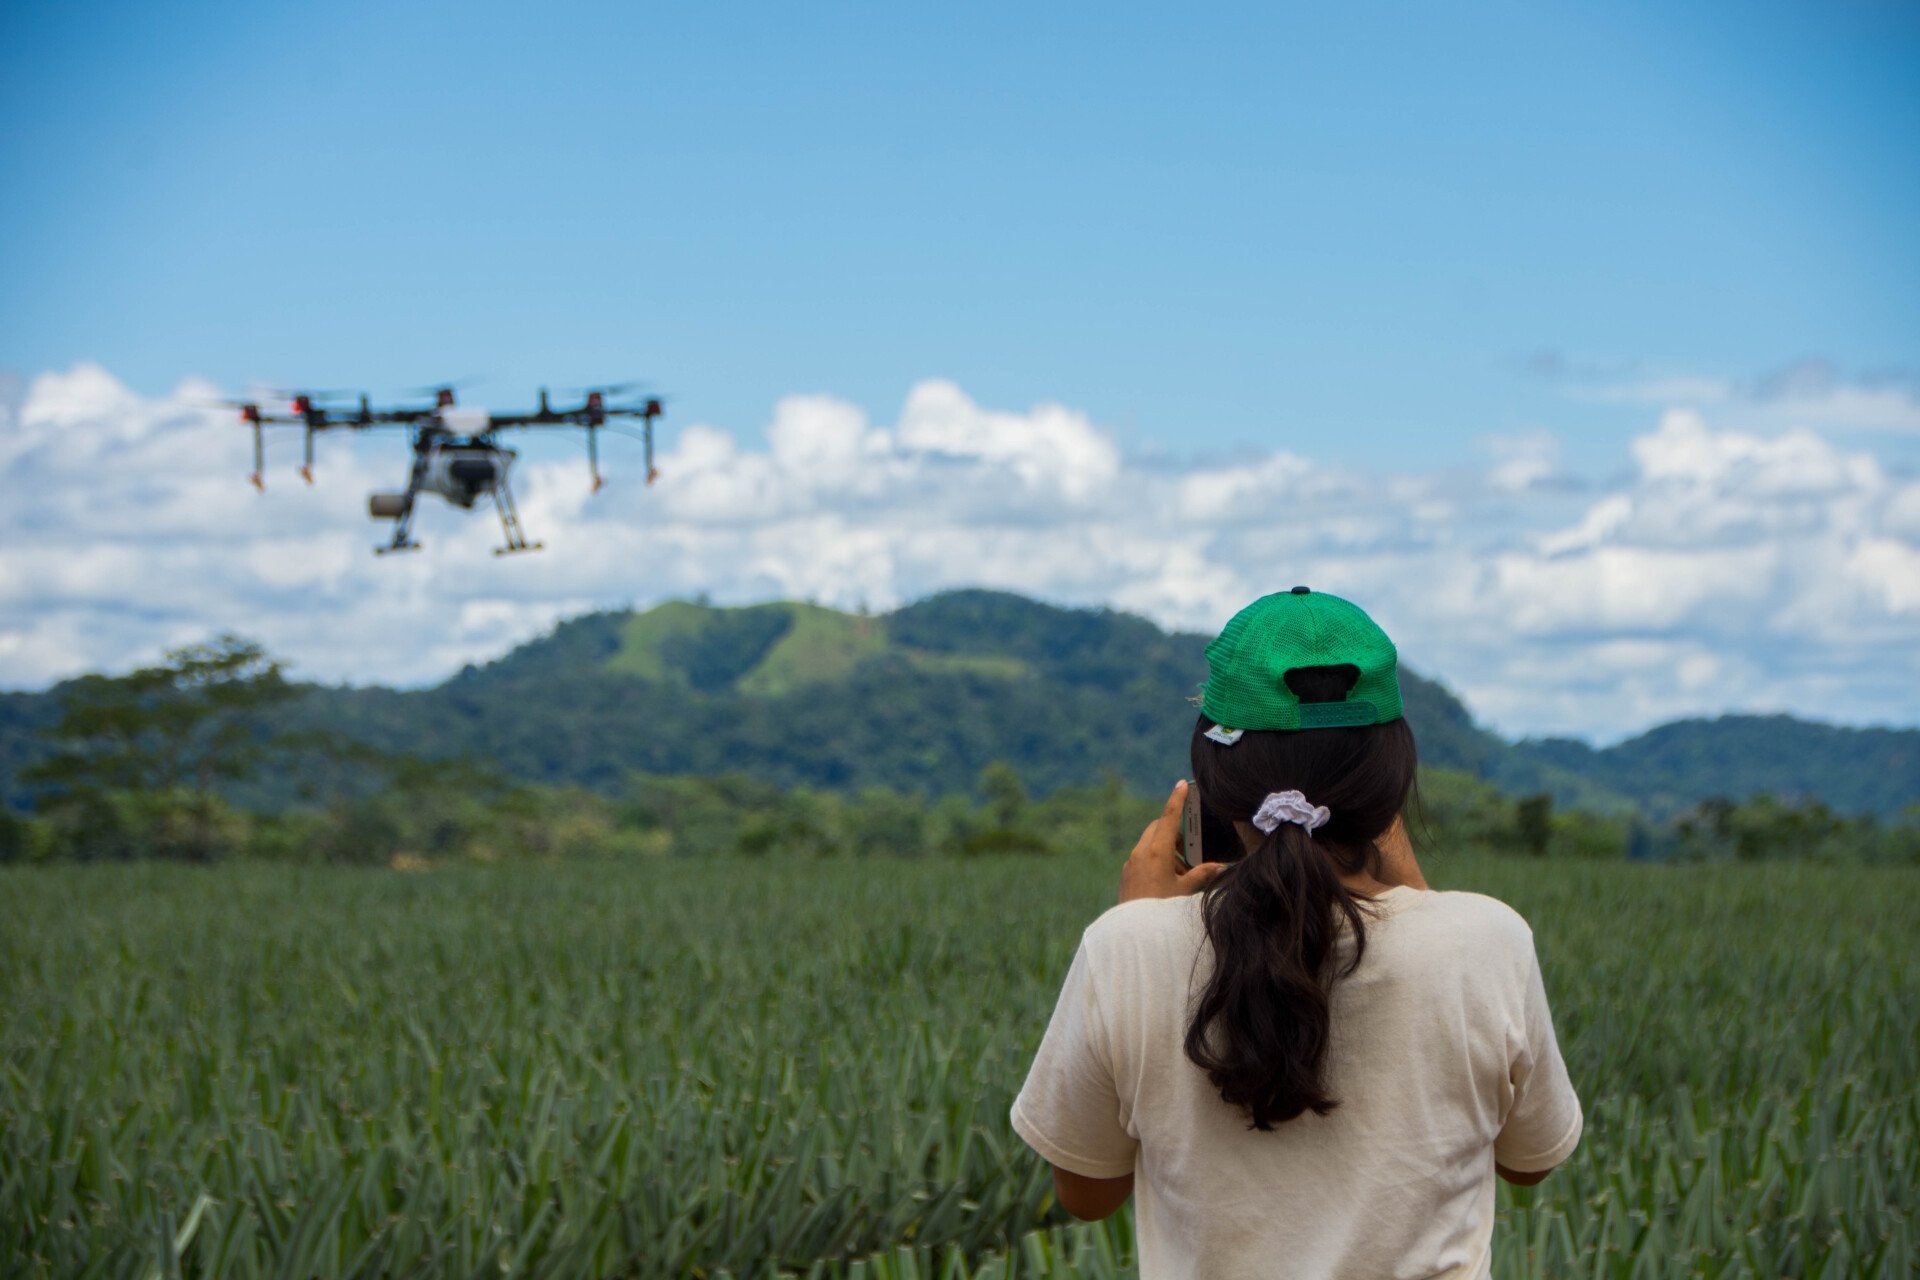 A woman is looking at a drone flying over a field.